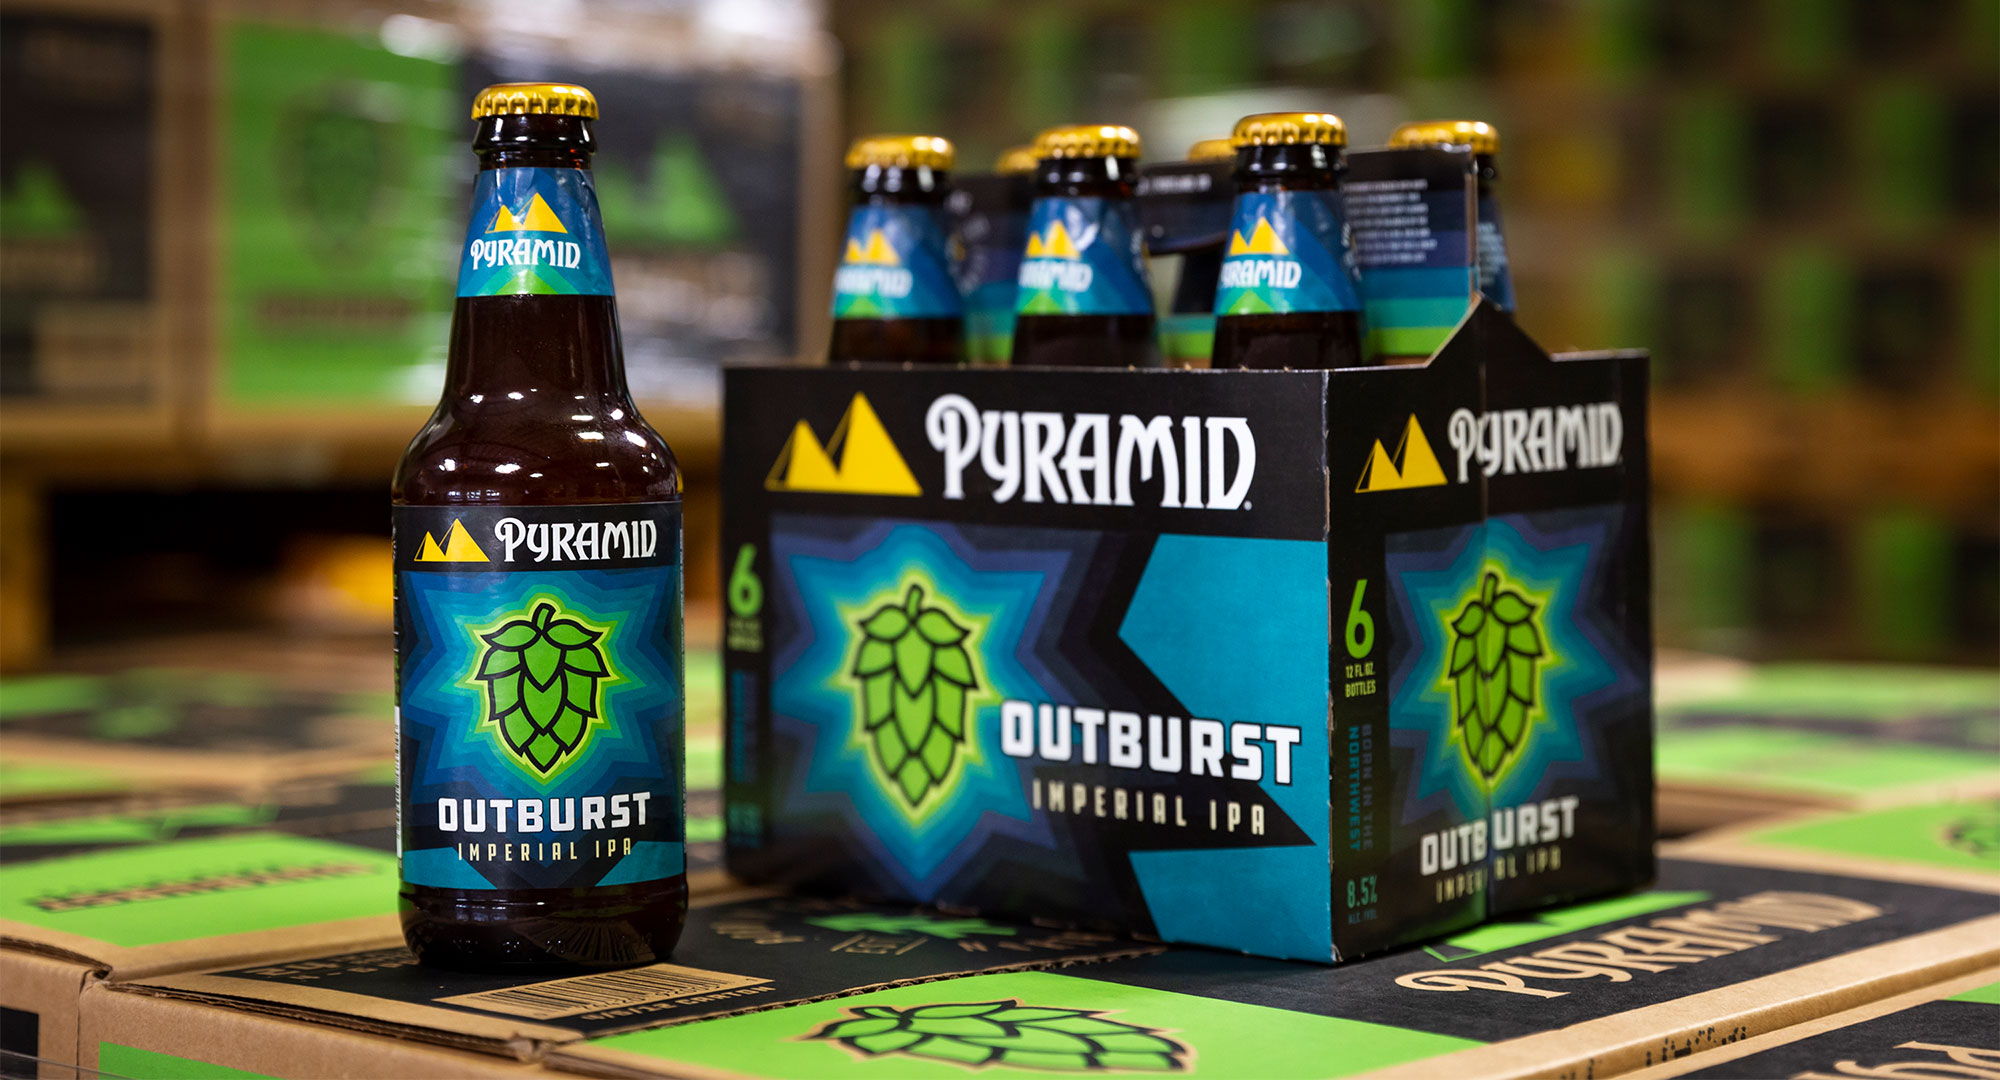 Outburst 6-pack and bottle on Pyramid boxes